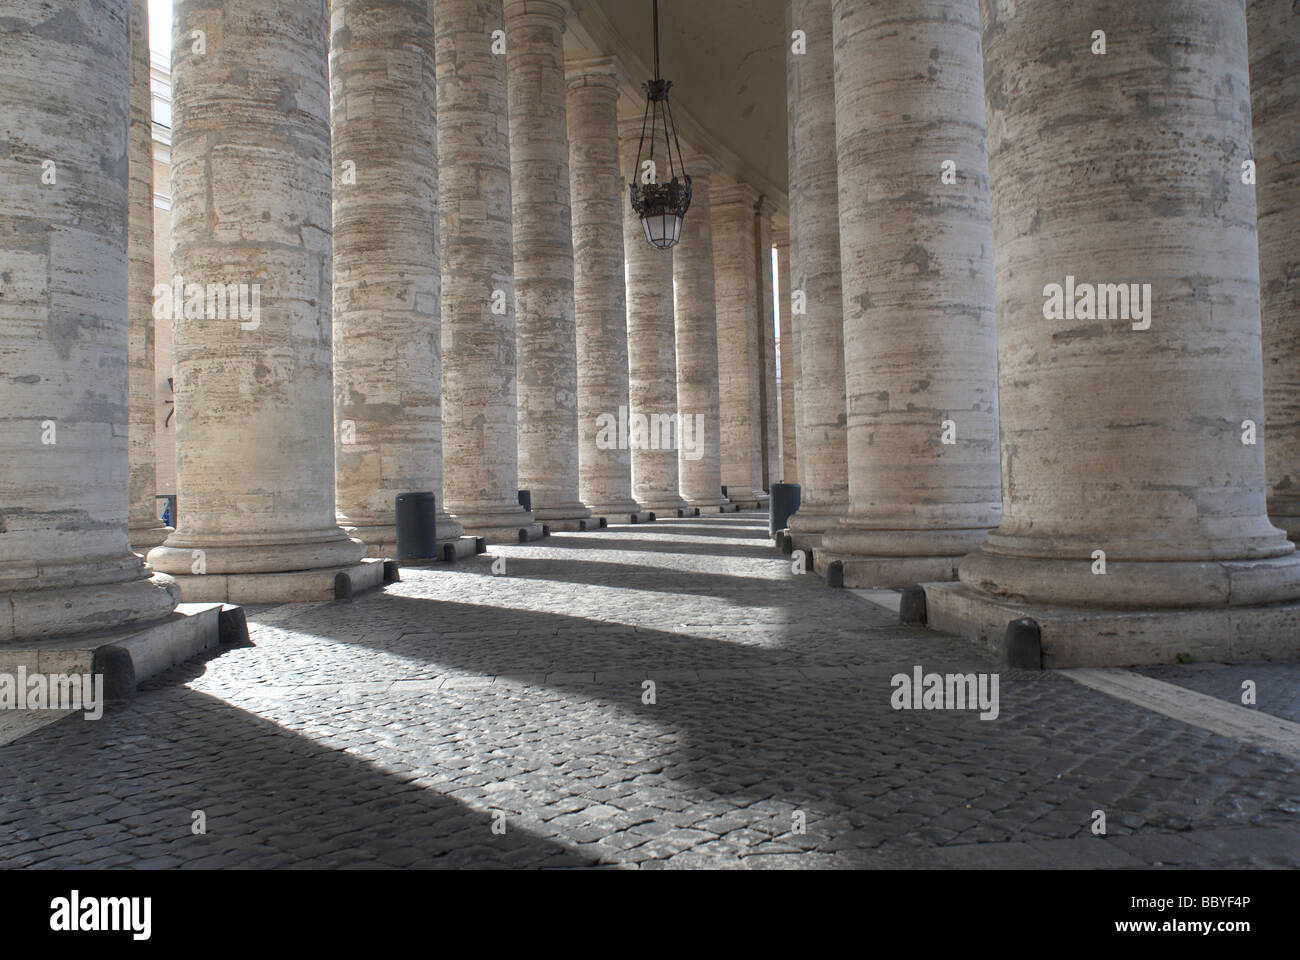 Colonnade at St Peter's Basilica, Rome Stock Photo